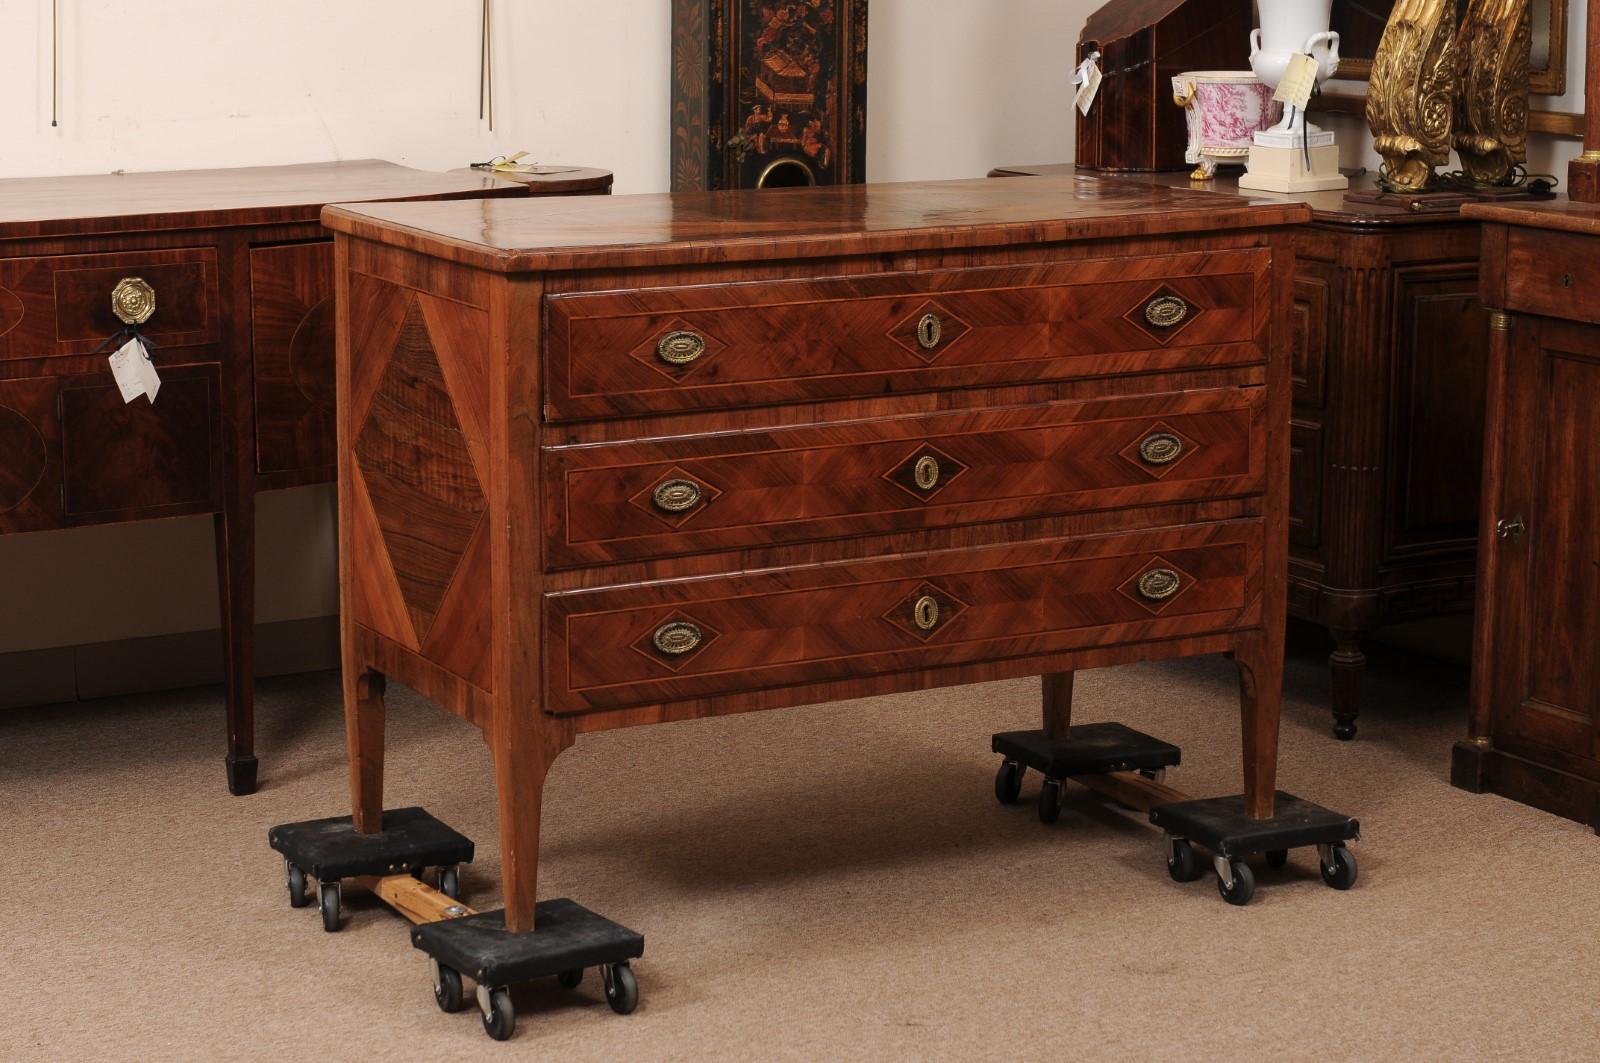 Late 18th Century Italian Neoclassical Parquetry Inlaid Walnut Commode with 3 Drawers